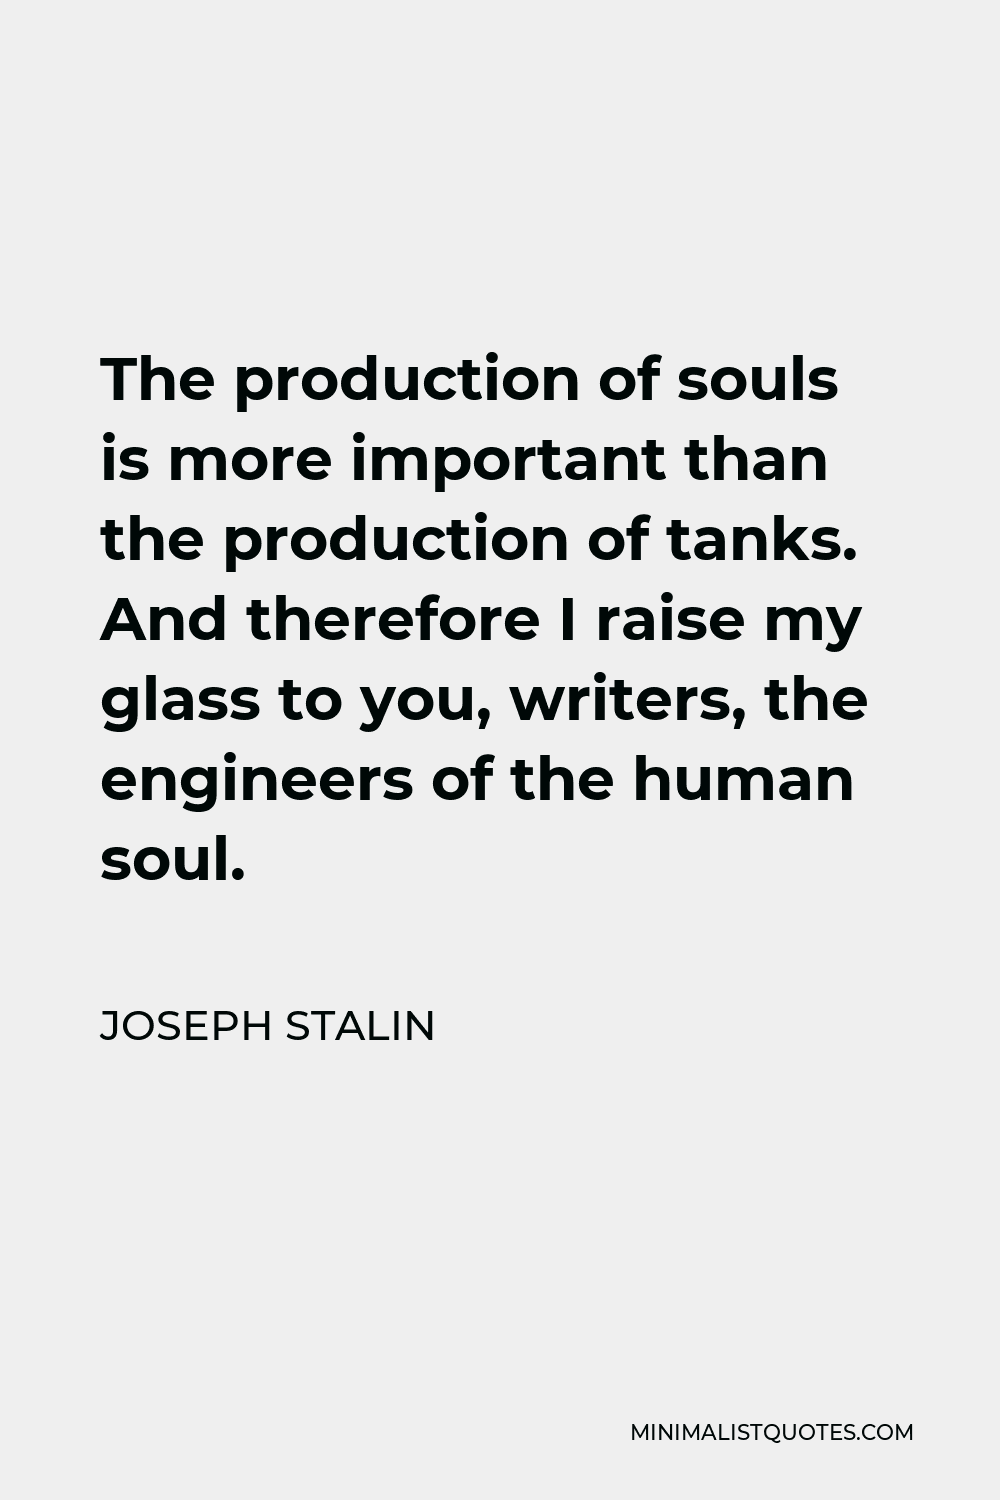 Joseph Stalin Quote - The production of souls is more important than the production of tanks. And therefore I raise my glass to you, writers, the engineers of the human soul.